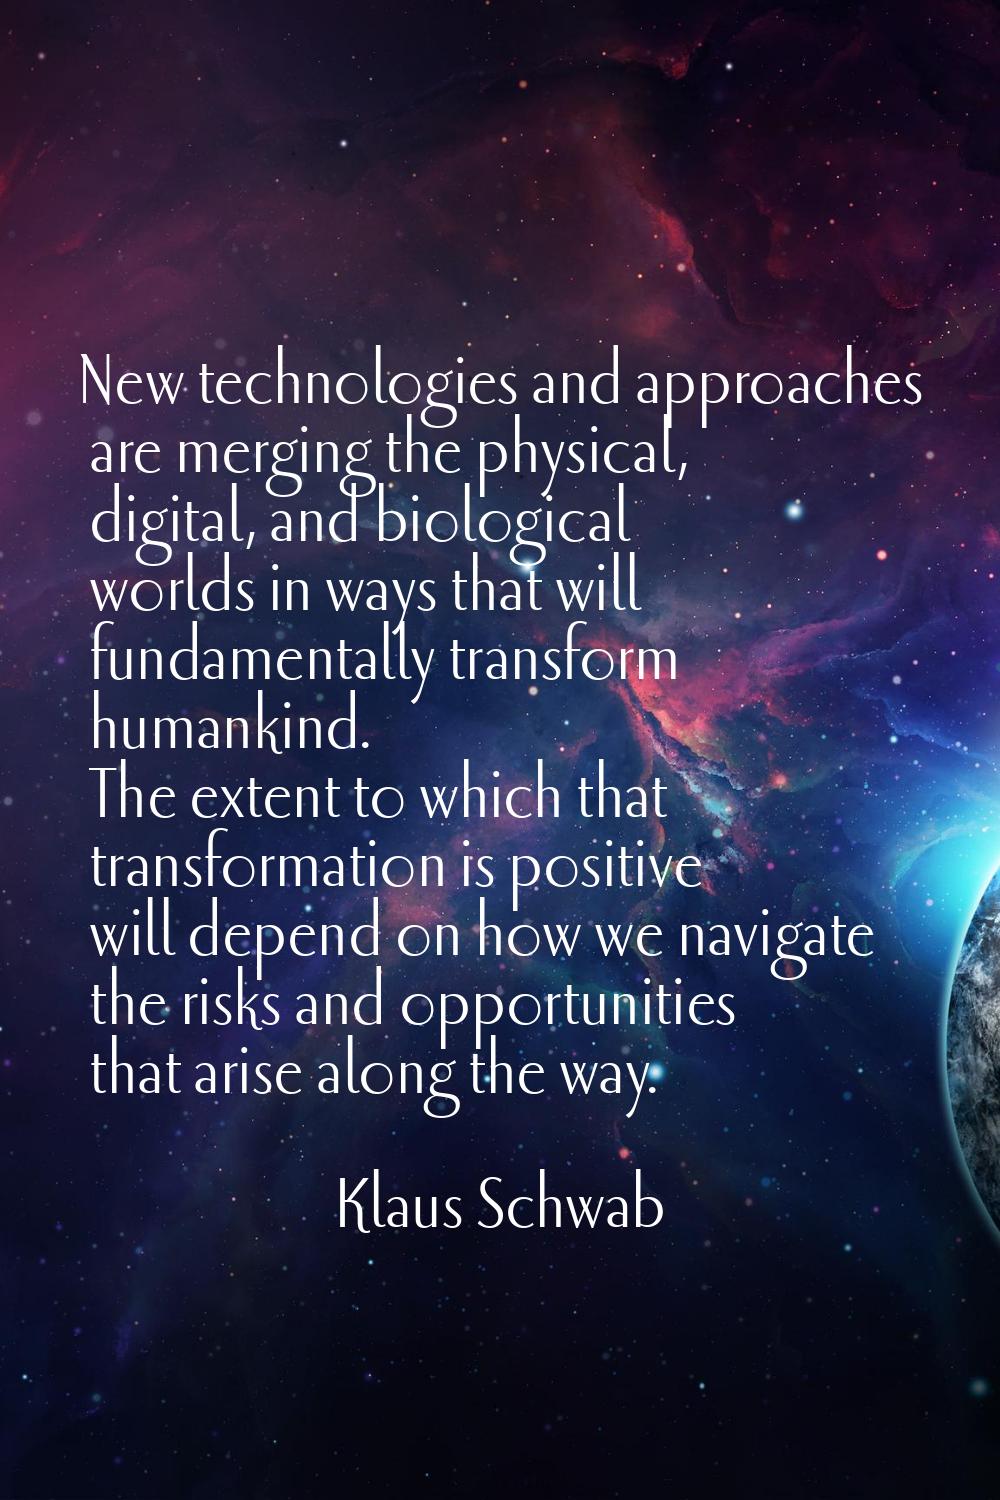 New technologies and approaches are merging the physical, digital, and biological worlds in ways th